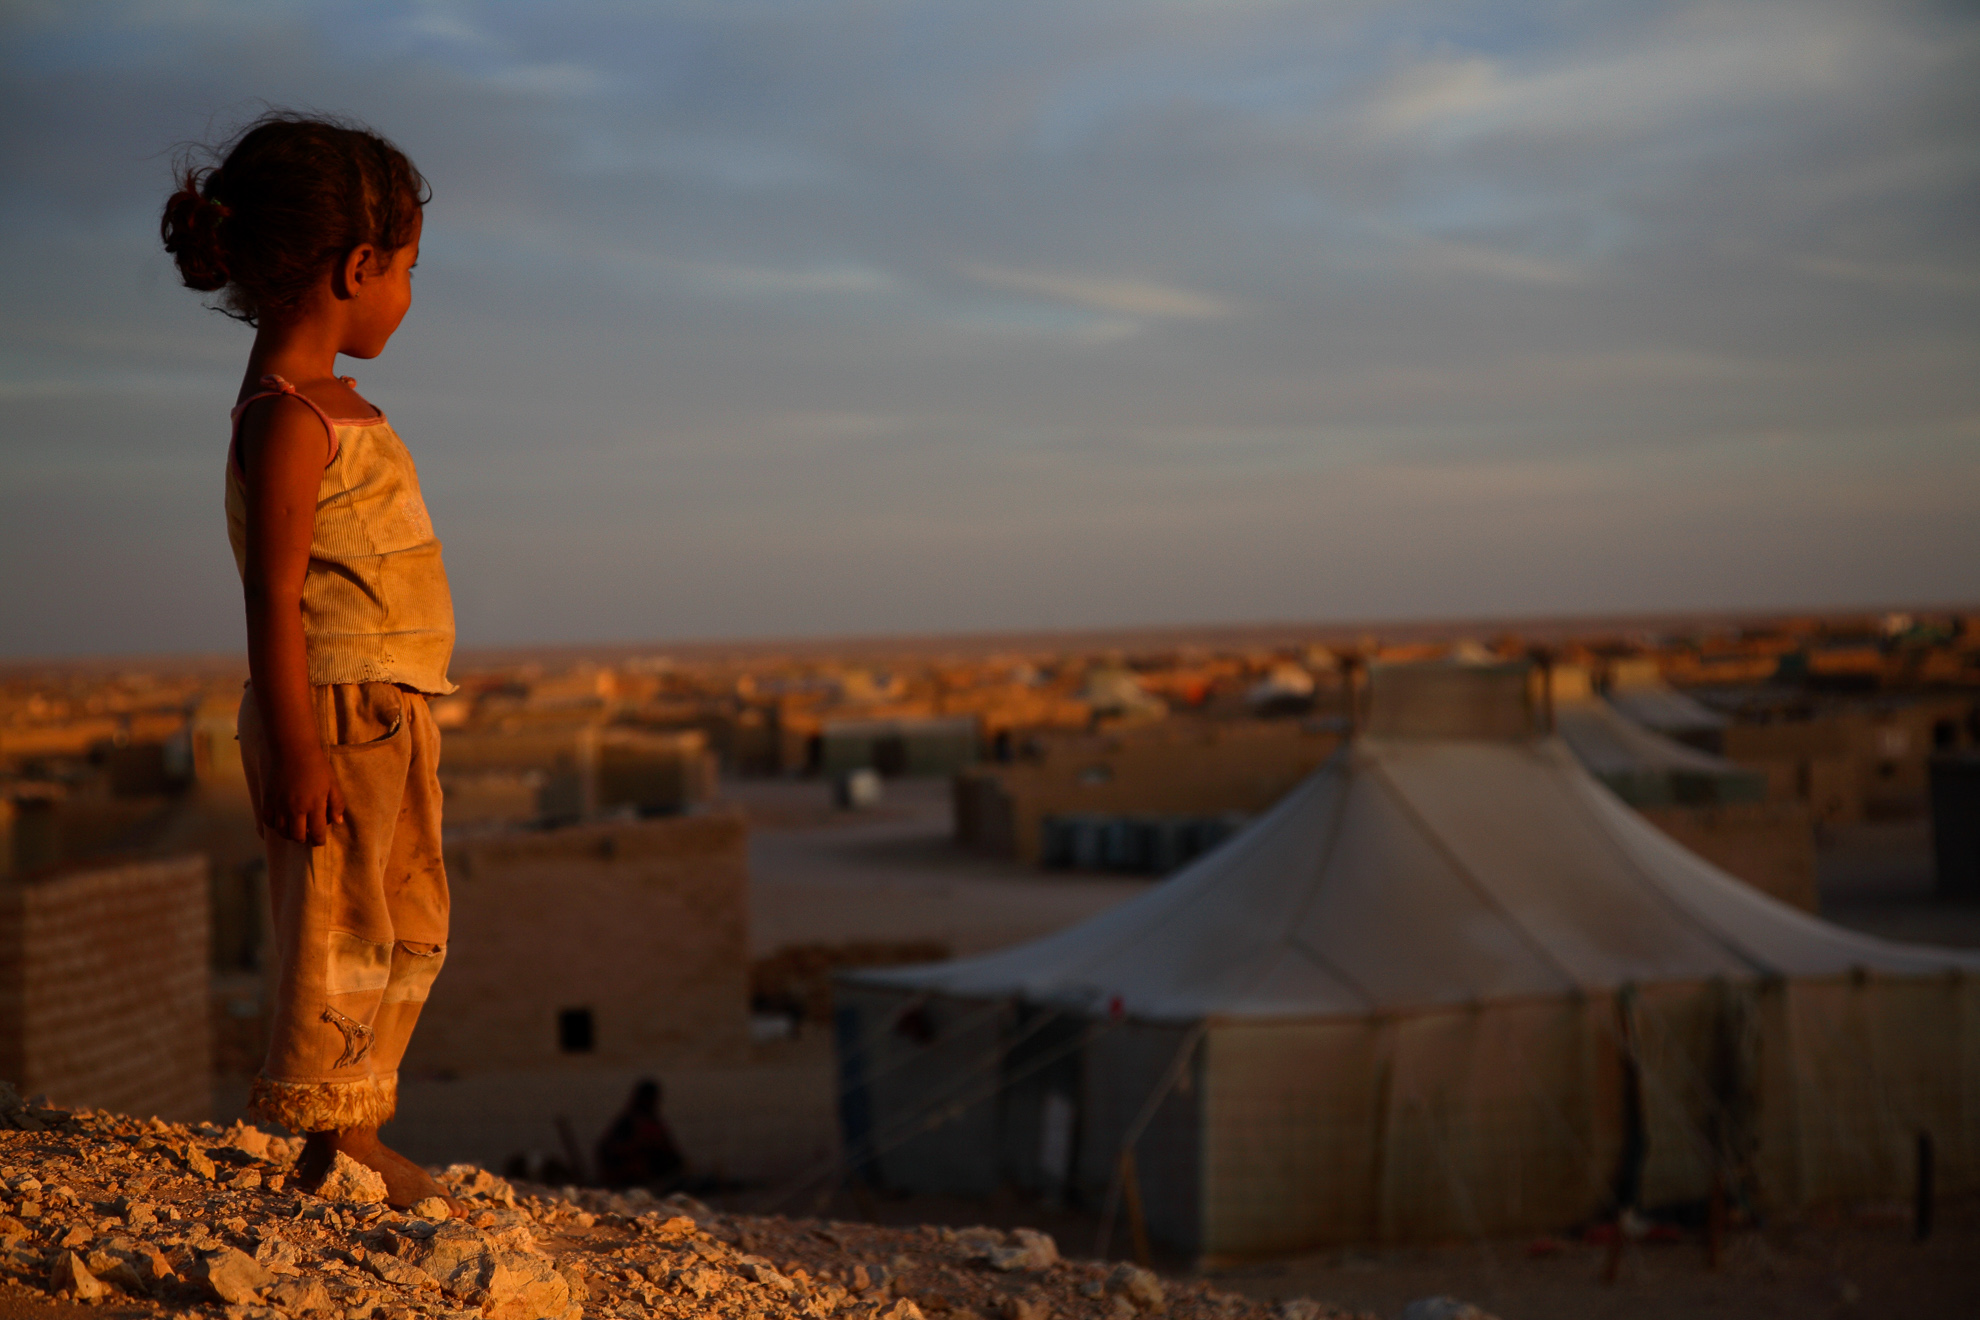 Glana, a four-year-old girl, watches the last rays of sunlight in the Smara refugee camp. In the background, is her family's tent.